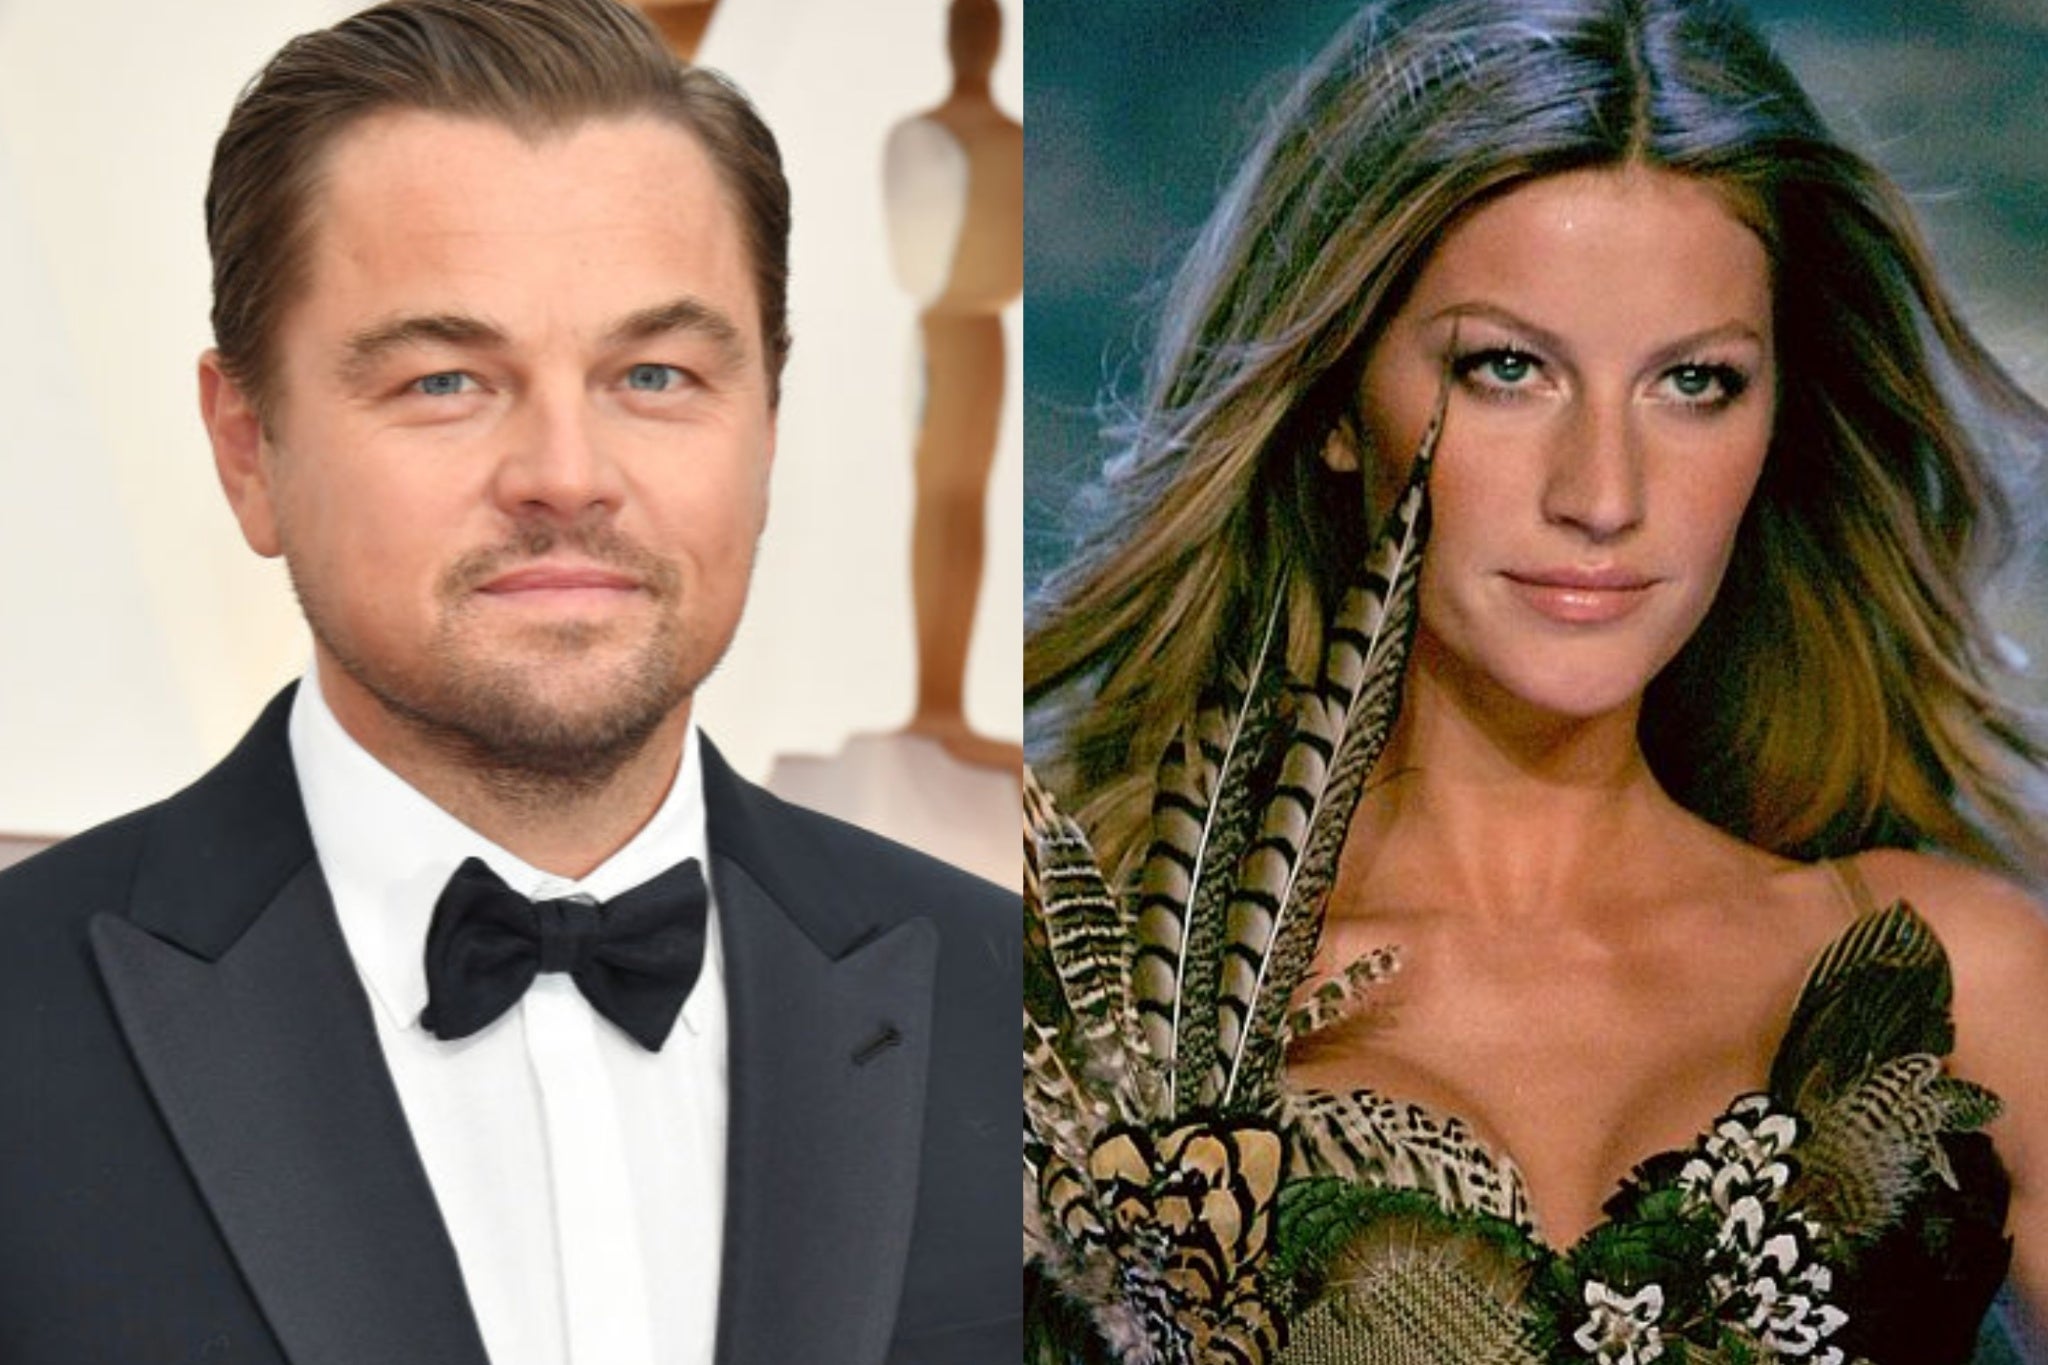 Leonardo DiCaprio, and model Gisele Bundchen during a 2006 Victoria’s Secret show – the pair were formerly an item